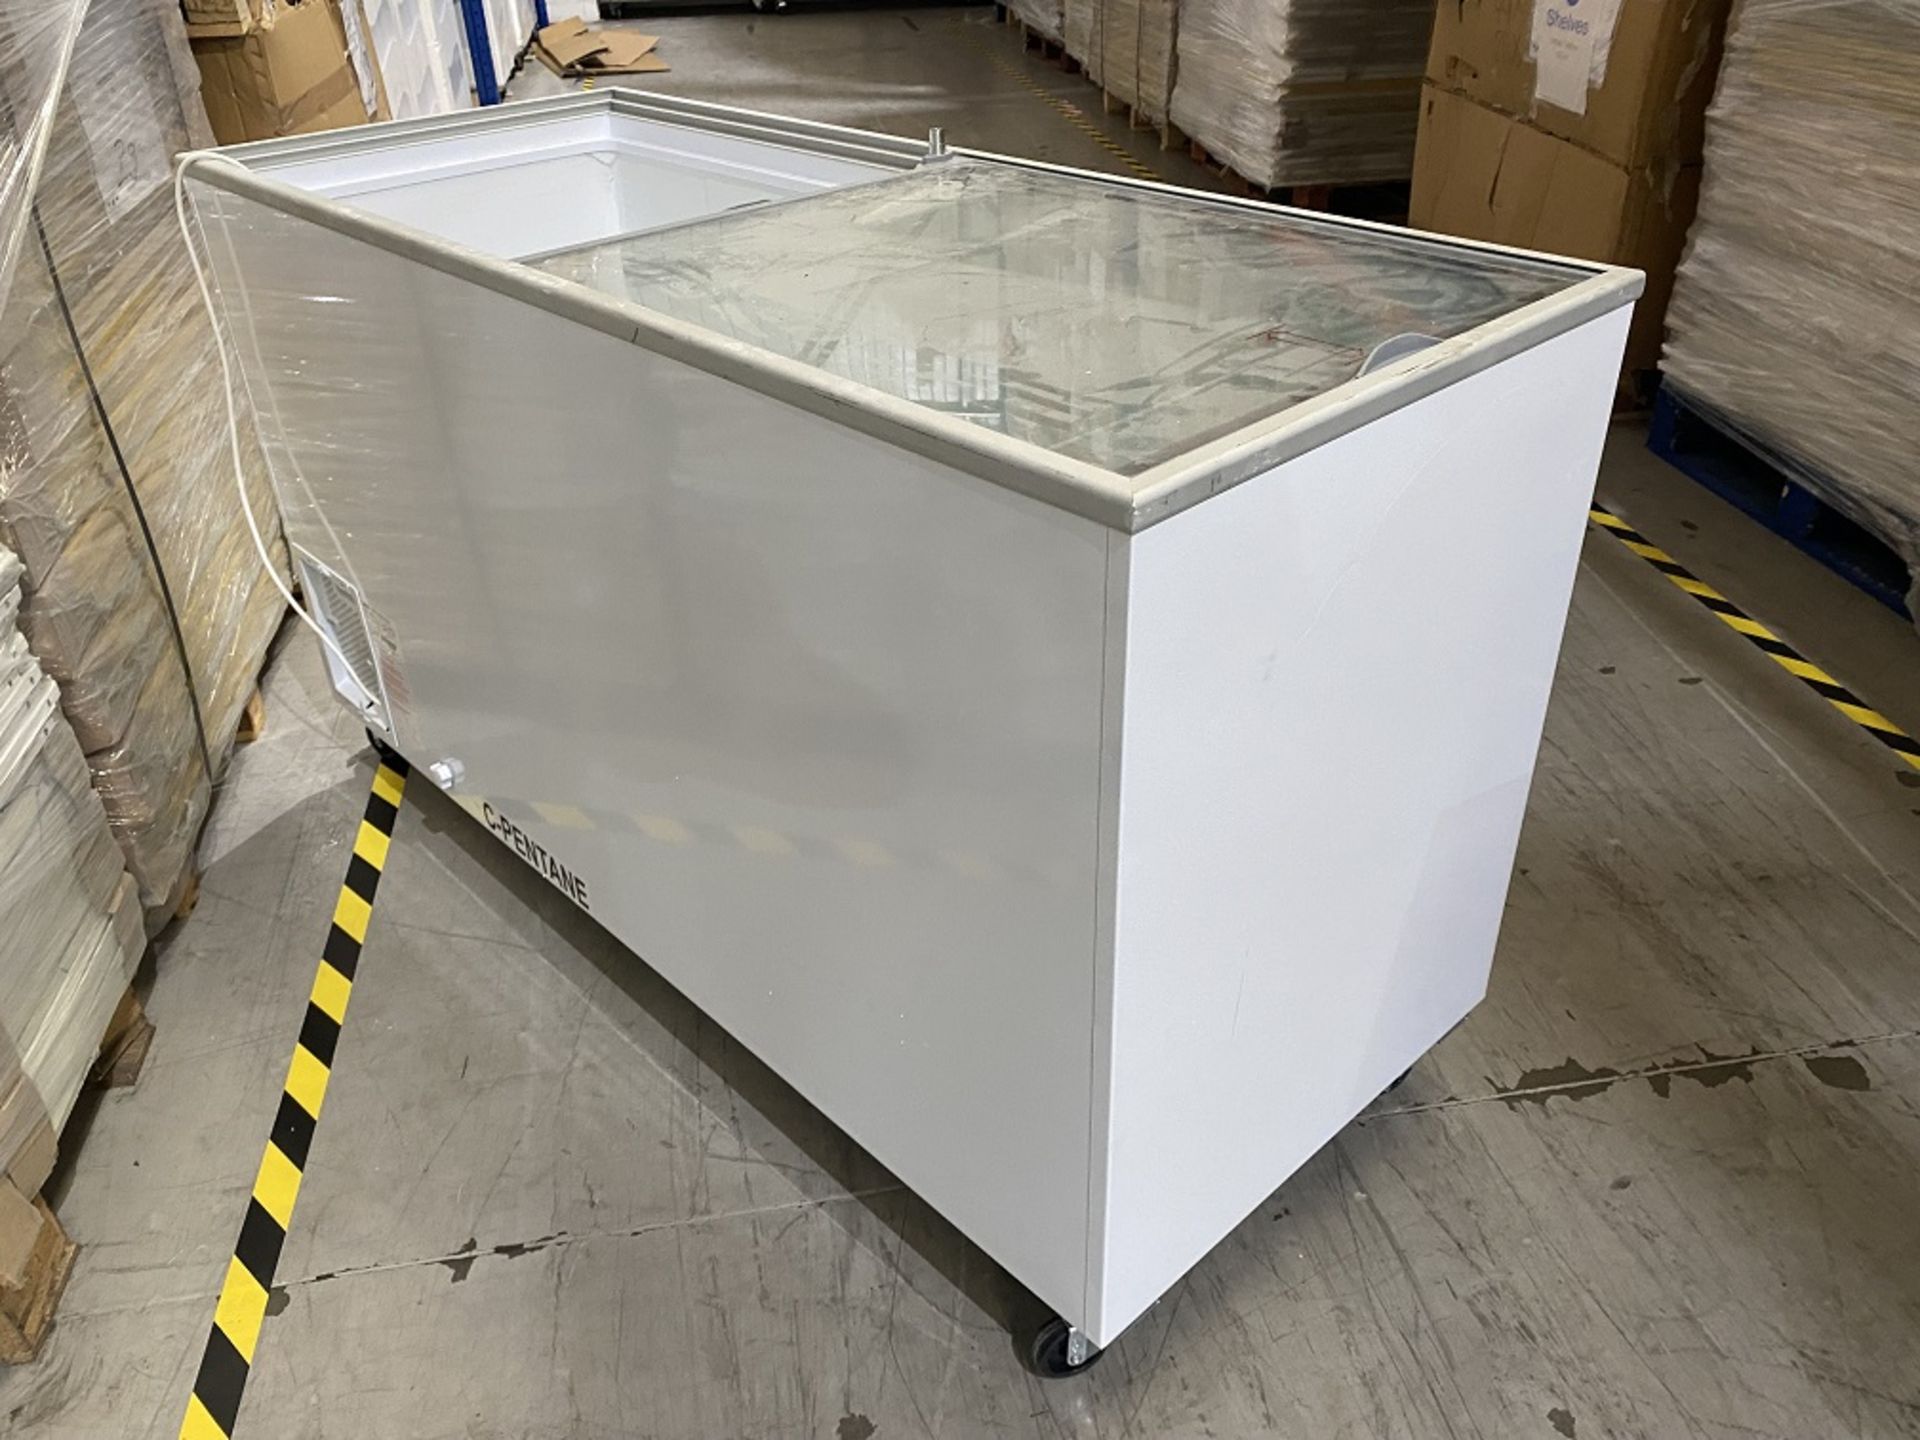 Ugur UDD 500 SC 1550mm x 635mm Commercial Chest Freezer, with sliding glass door top, 240VPlease - Image 3 of 4